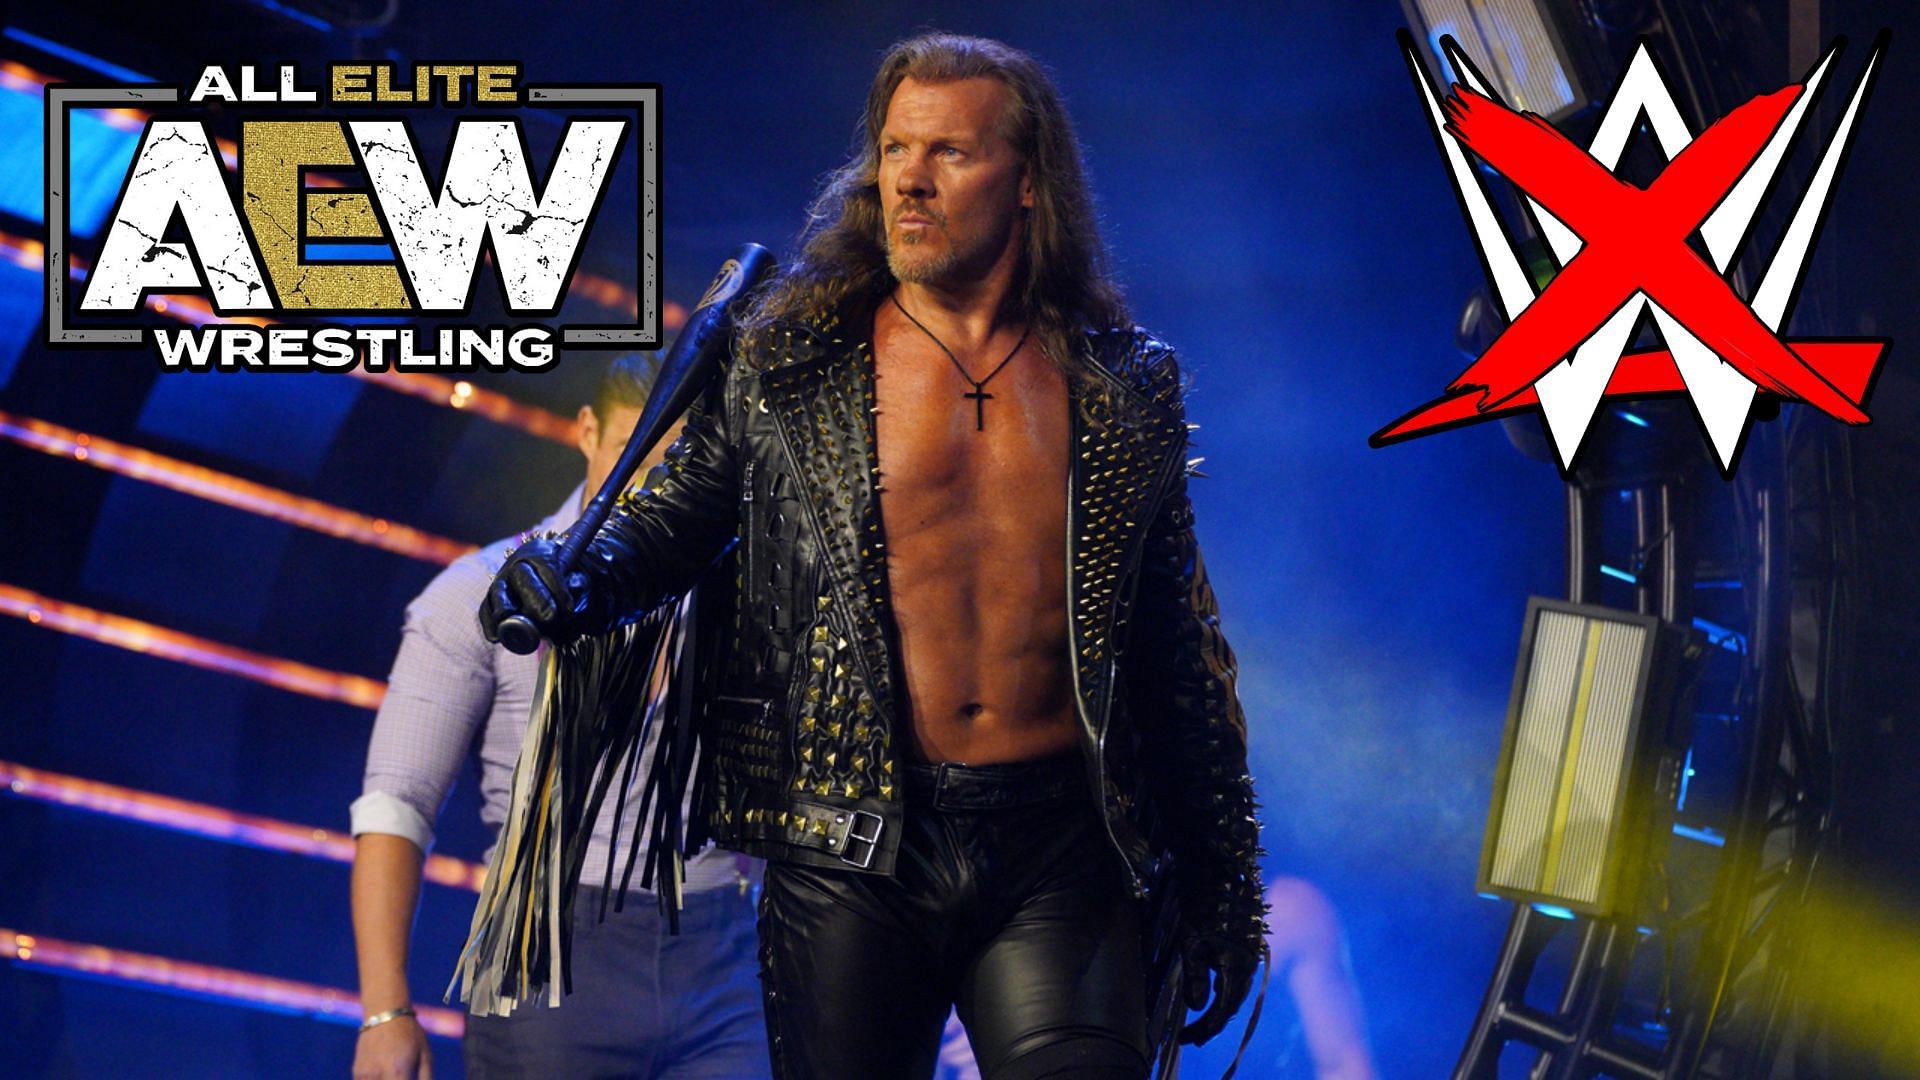 How much influence does Chris Jericho have in AEW?